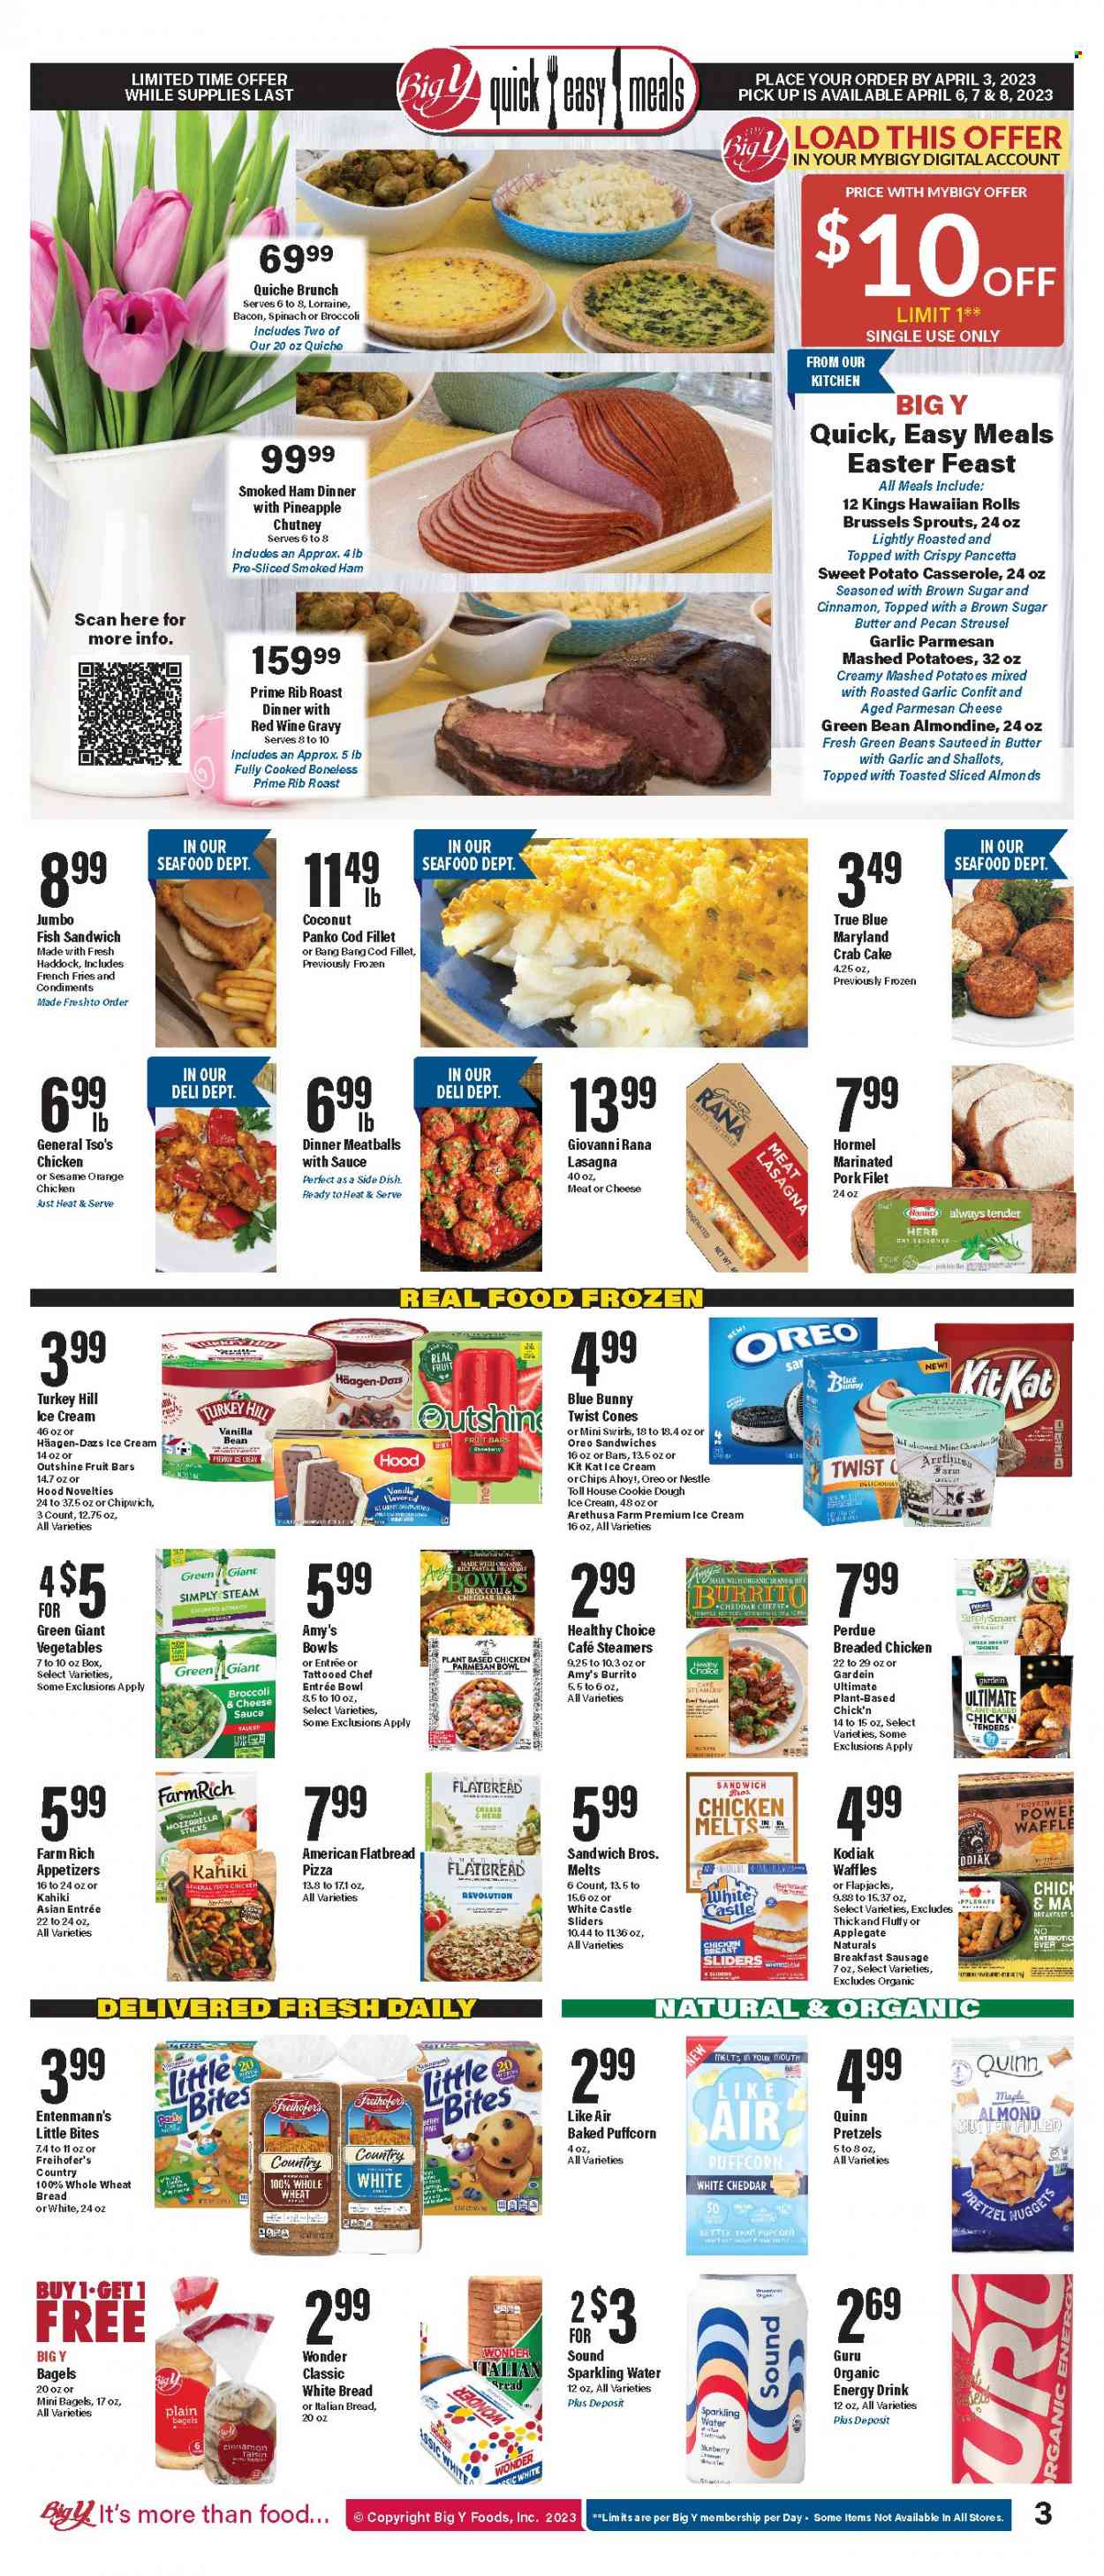 thumbnail - Big Y Flyer - 03/23/2023 - 03/29/2023 - Sales products - bagels, wheat bread, white bread, pretzels, flatbread, hawaiian rolls, waffles, Entenmann's, panko breadcrumbs, broccoli, green beans, sweet potato, brussel sprouts, pineapple, oranges, coconut, cod, haddock, seafood, crab, fish, mashed potatoes, pizza, meatballs, sandwich, nuggets, fried chicken, burrito, lasagna meal, Giovanni Rana, Healthy Choice, Perdue®, Rana, Hormel, fish sandwich, roast, bacon, ham, pancetta, smoked ham, sausage, cheddar, ice cream, Häagen-Dazs, Blue Bunny, potato fries, french fries, Nestlé, KitKat, Little Bites, cane sugar, cinnamon, chutney, almonds, energy drink, sparkling water, water, Castle, chicken, pork meat. Page 4.